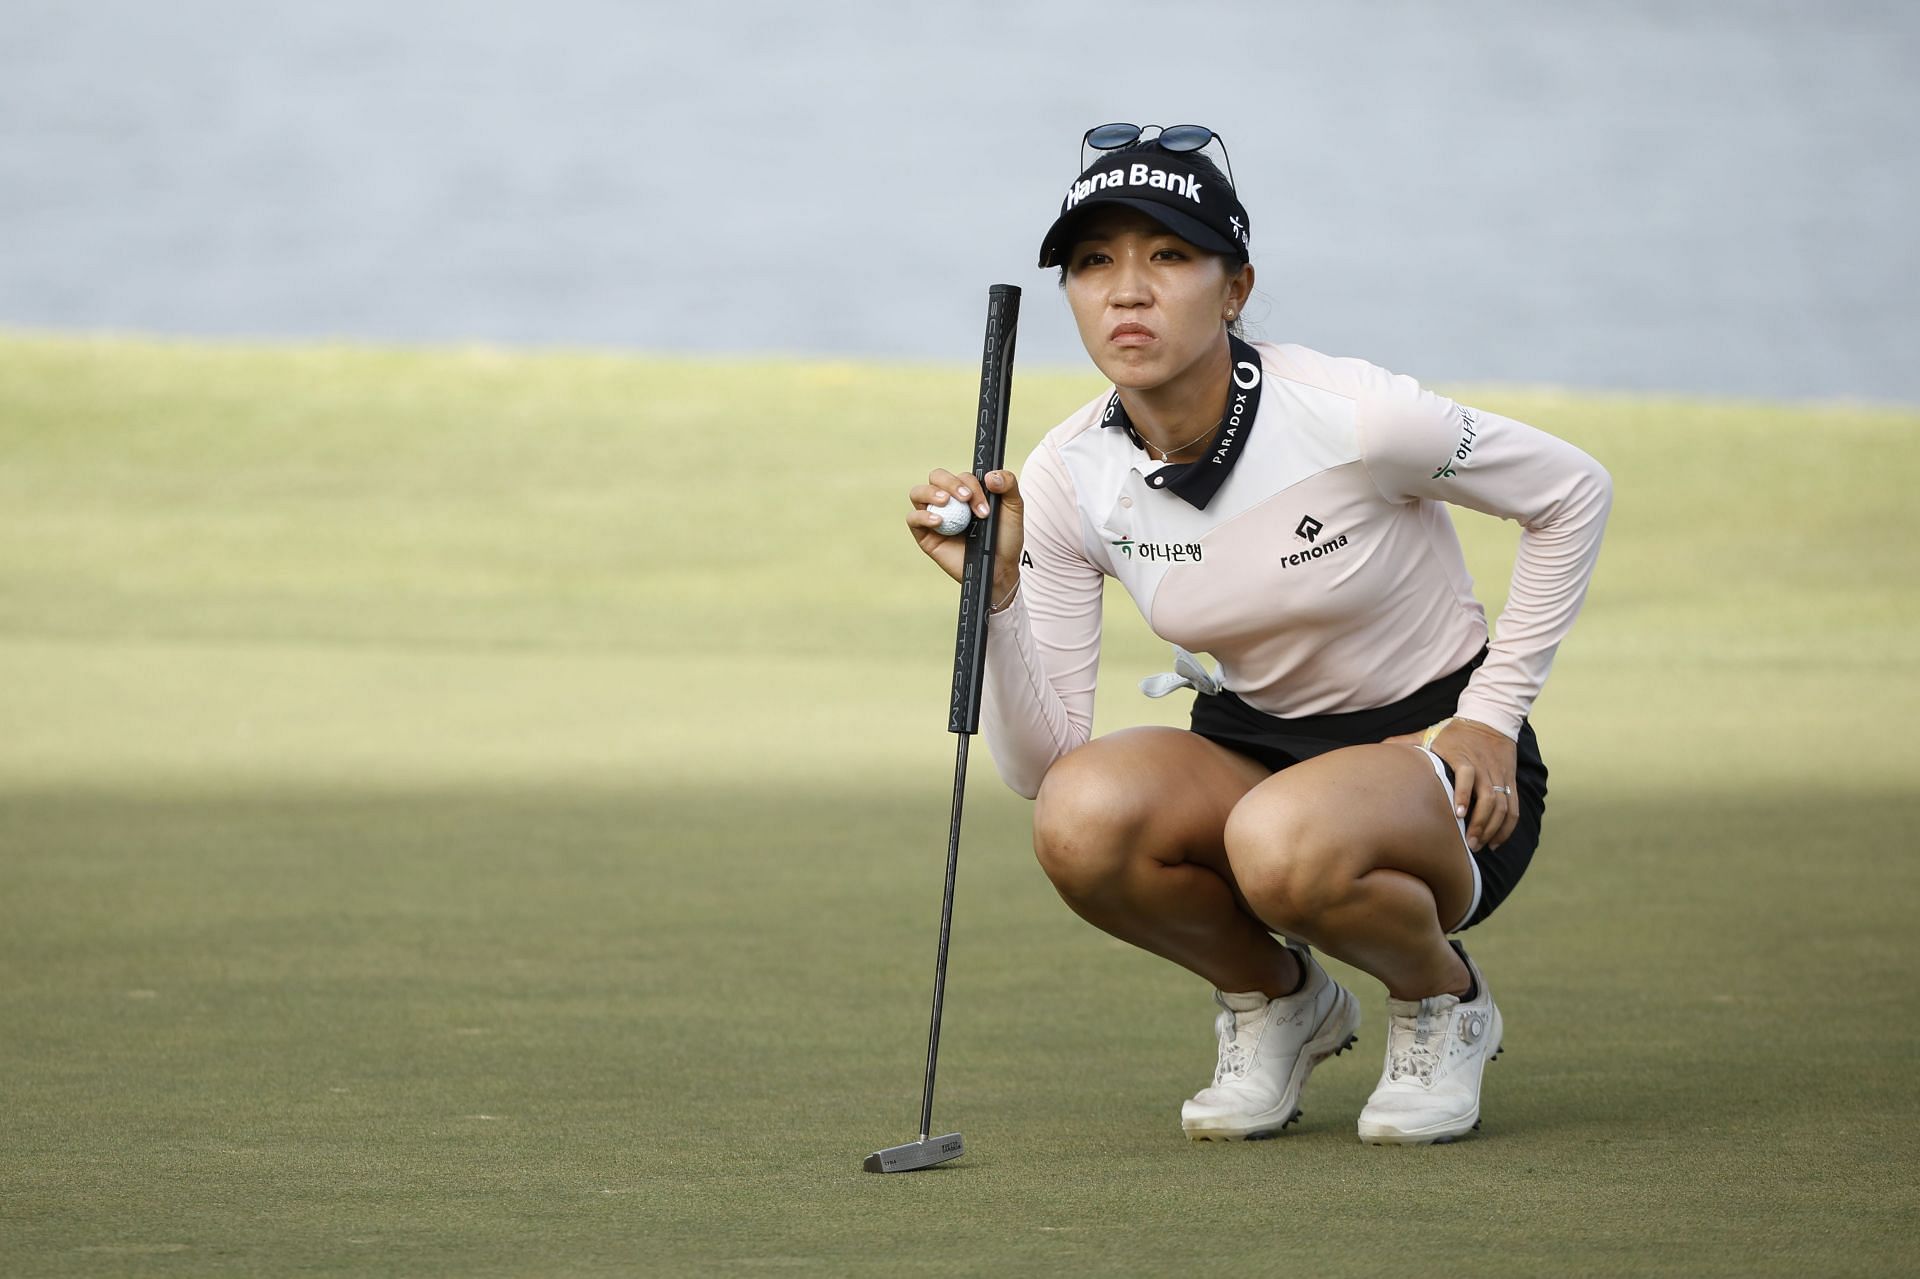 Can Lydia Ko win the Tournament of Champions?